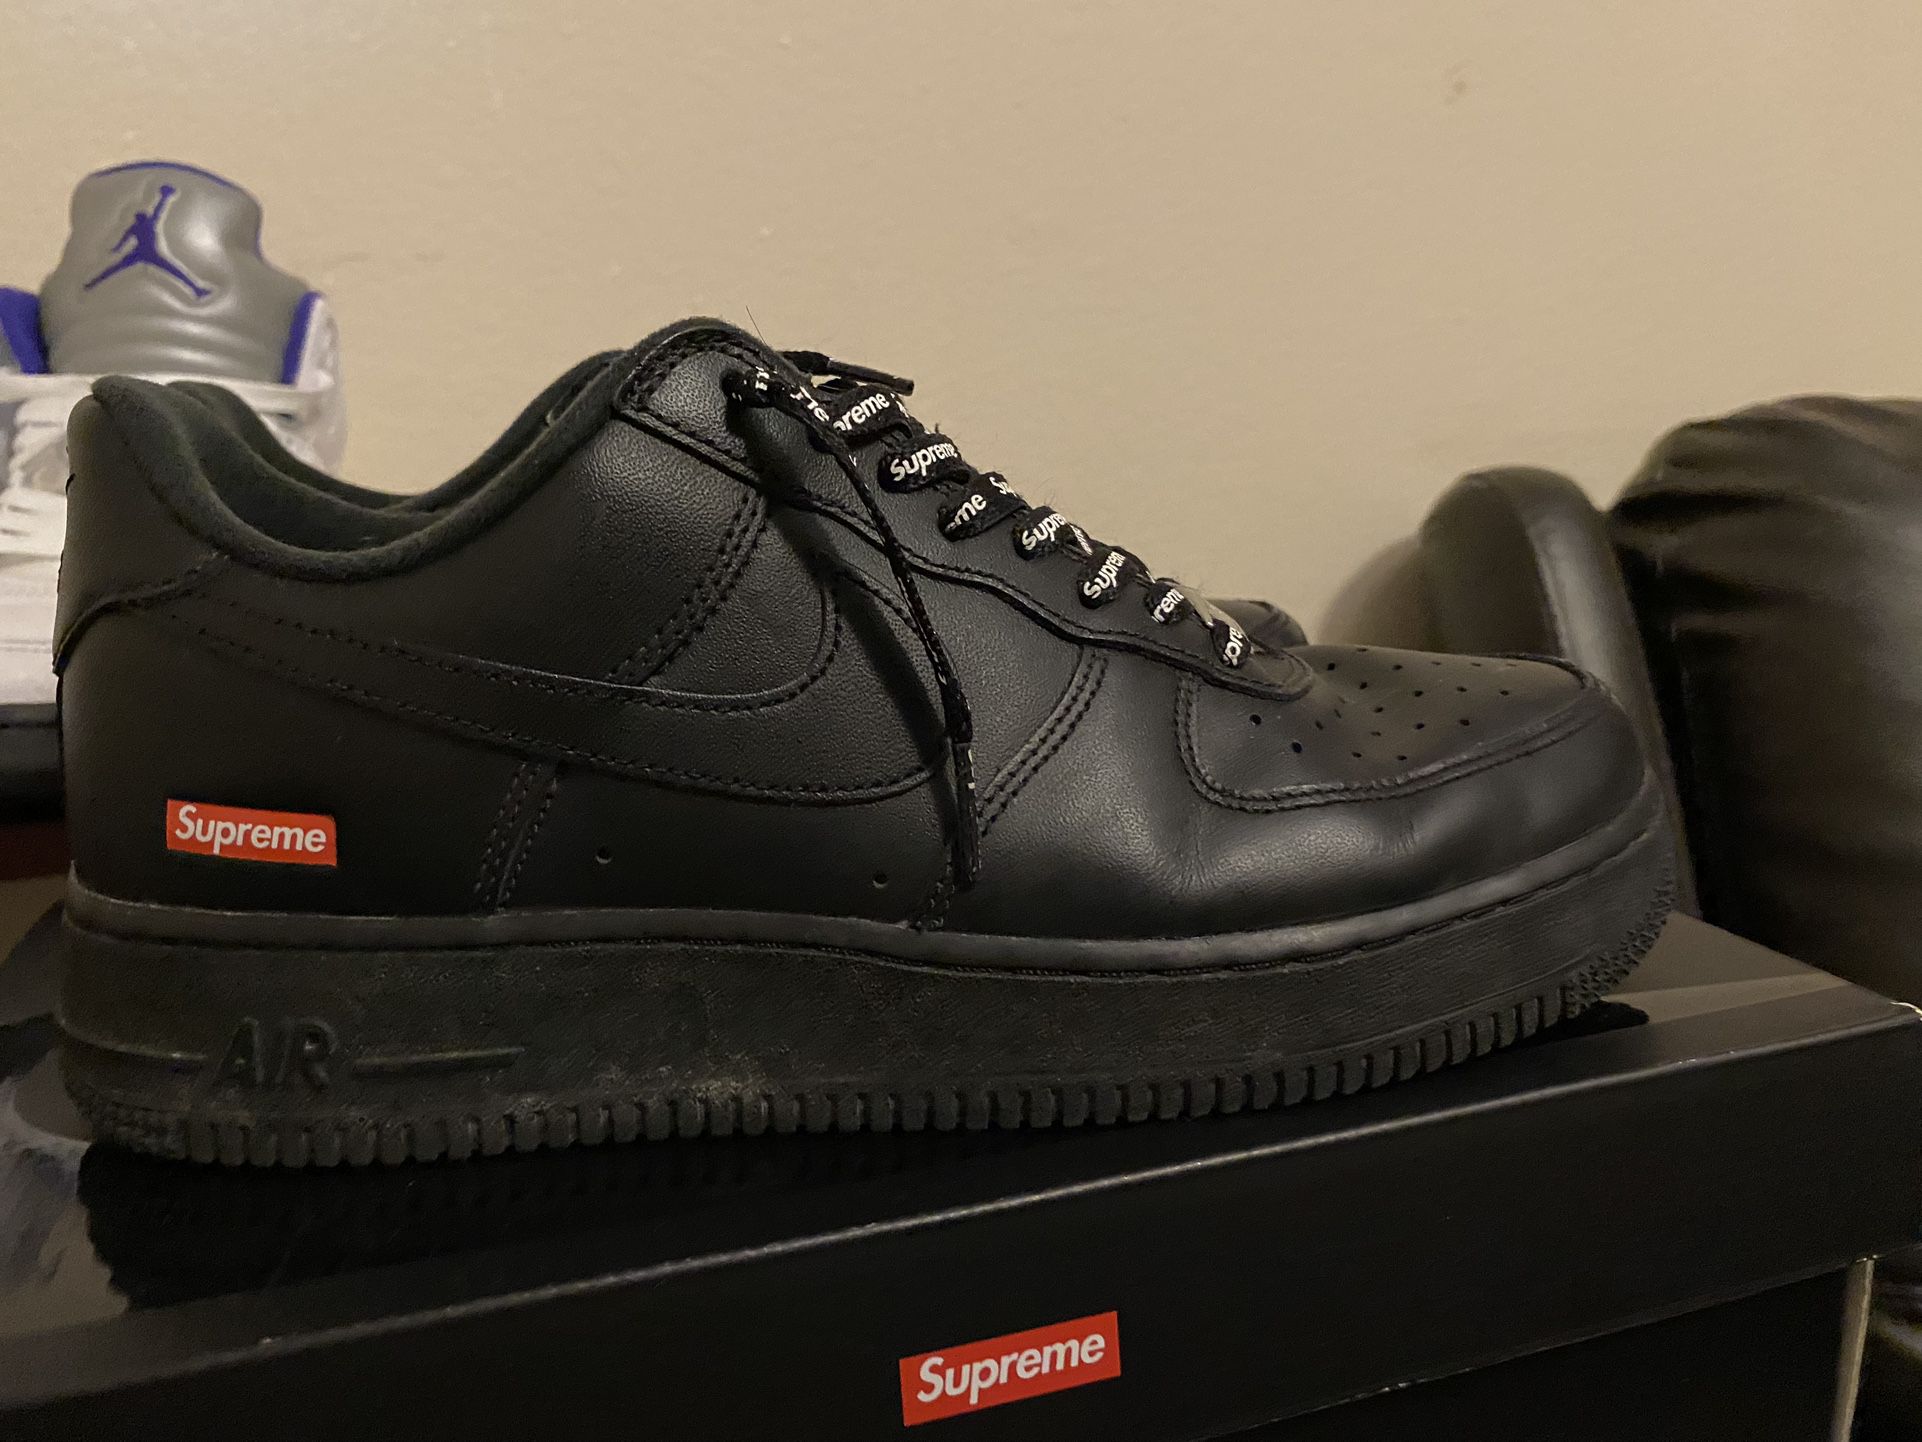 Supreme air force ones